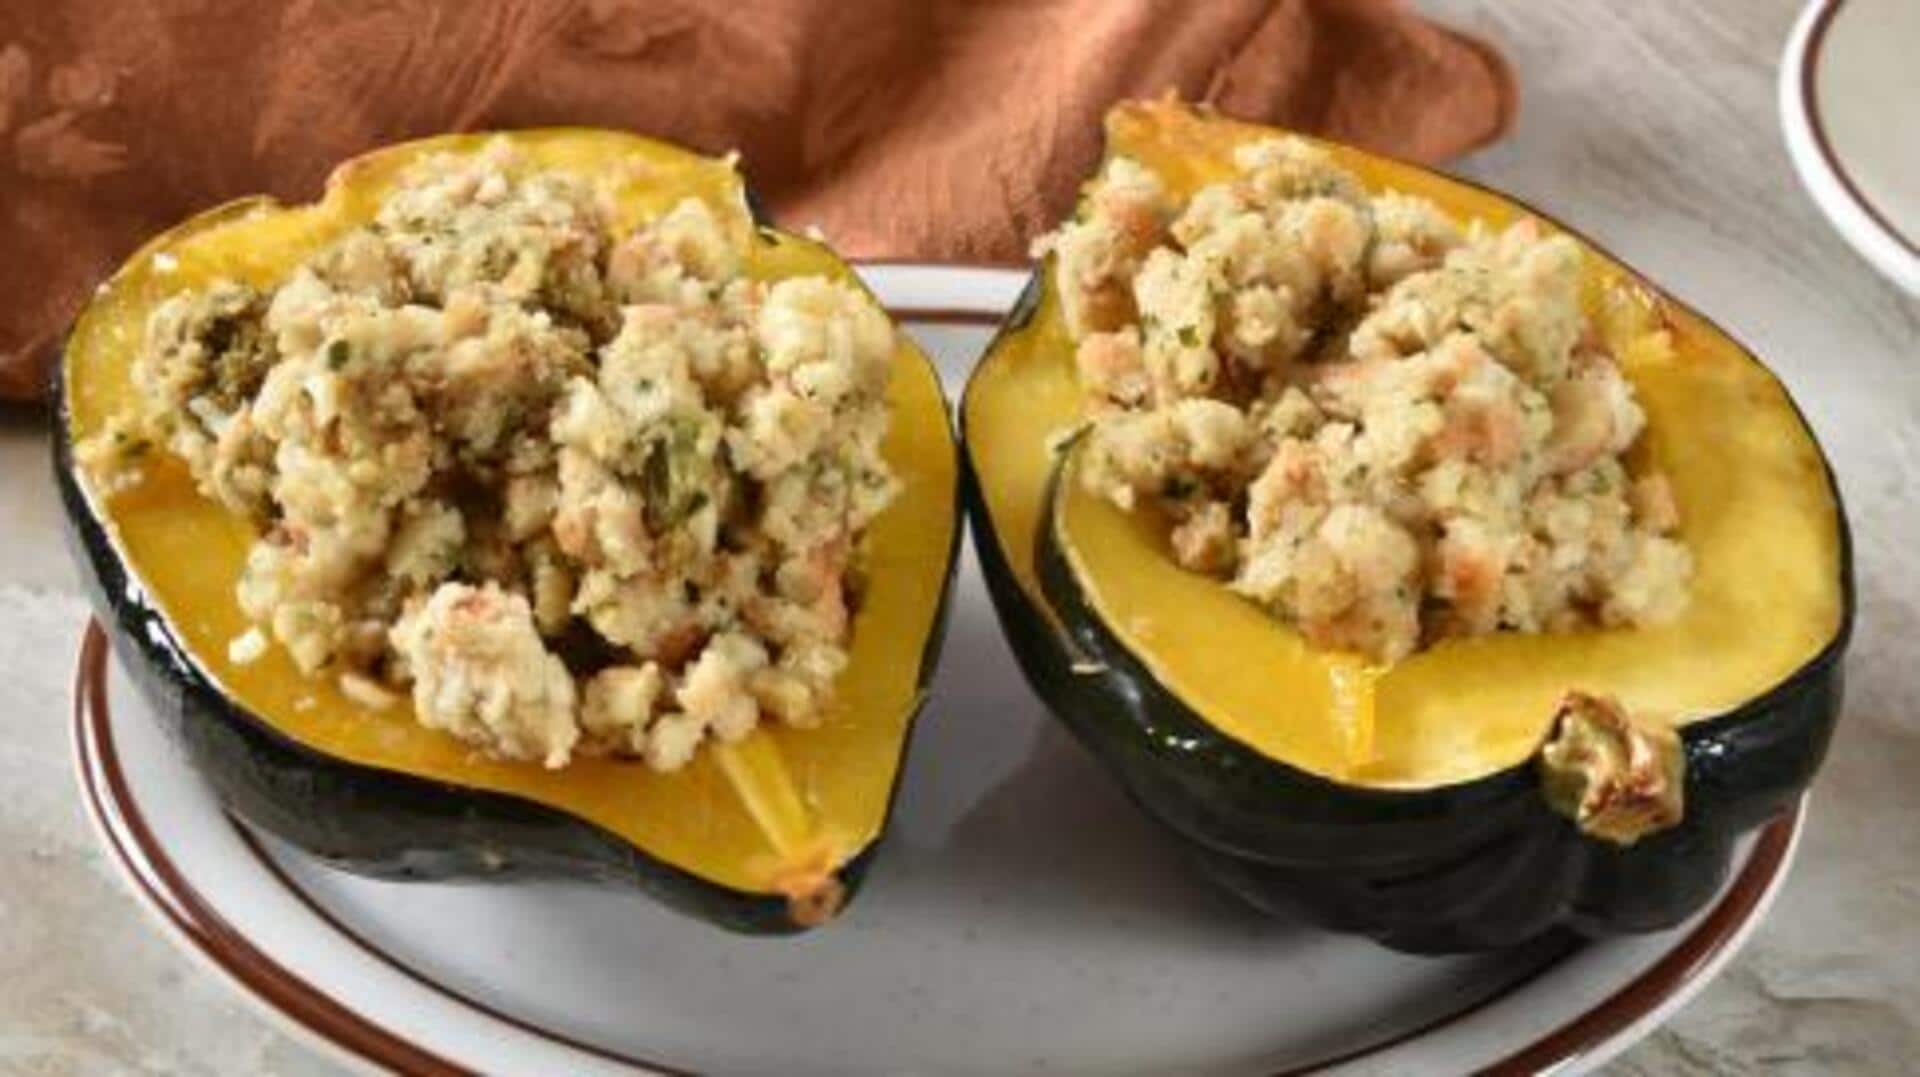 Try this Moroccan-inspired stuffed acorn squash recipe